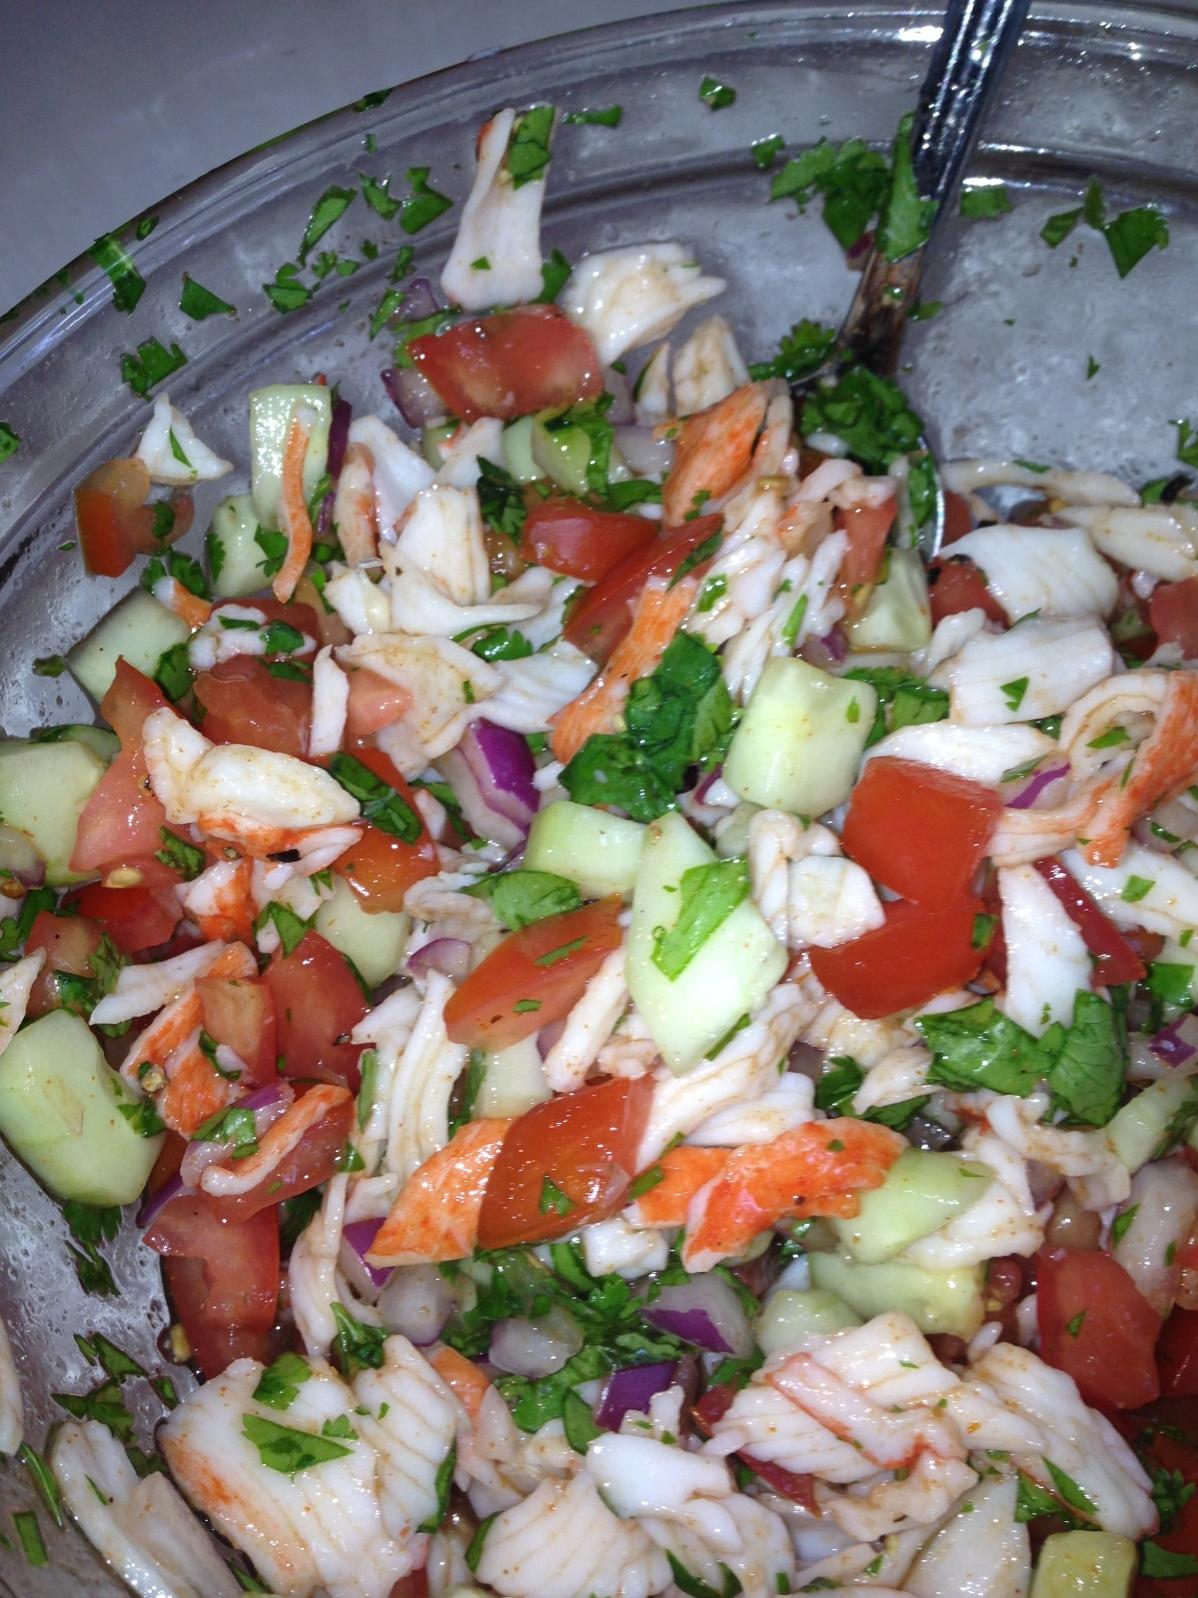  A sprinkle of fresh cilantro provides the perfect touch of herbiness, while adding an extra pop of color to the ceviche.